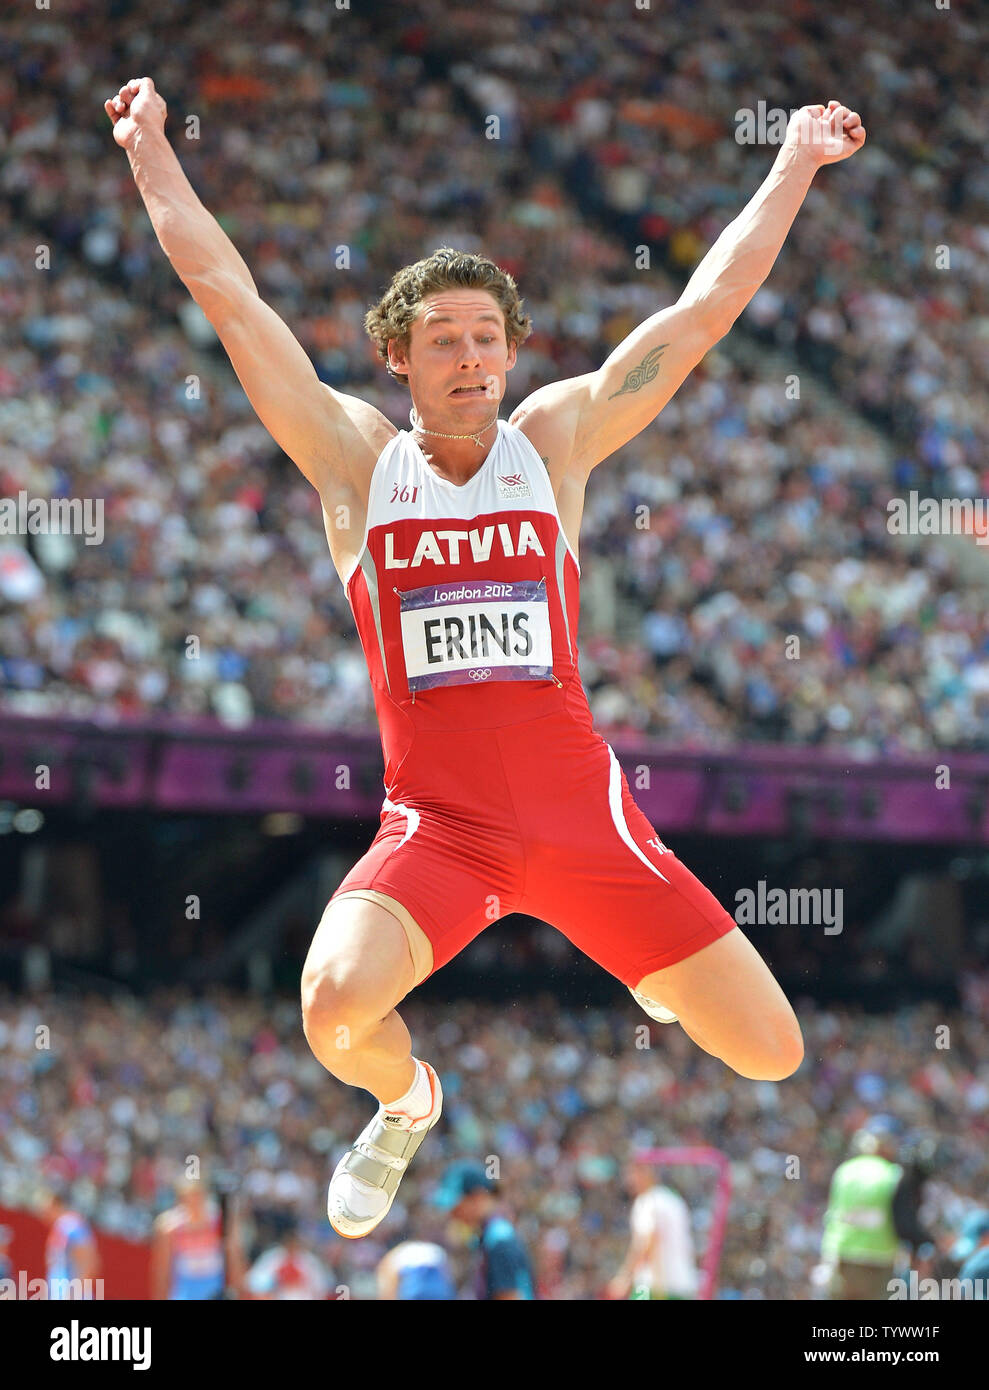 Edgars Erins of Latvia competes in the 